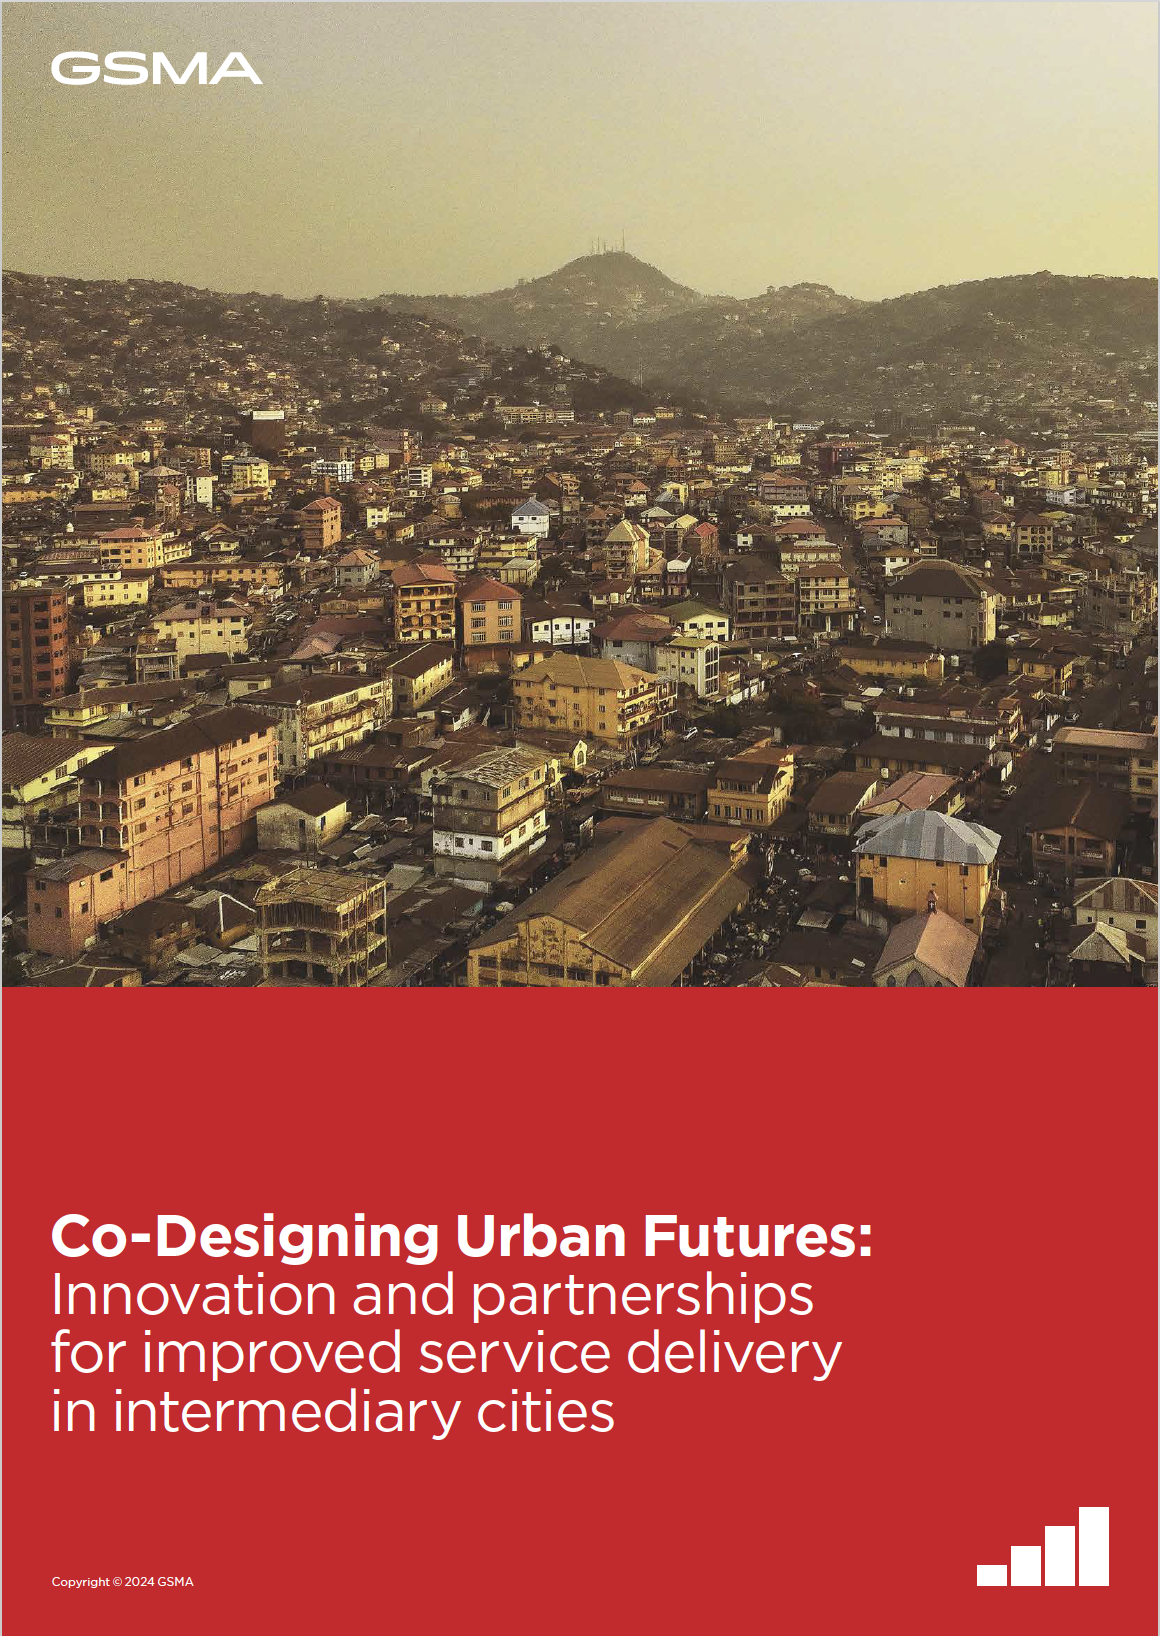 Co-Designing Urban Futures: Innovation and partnerships for improved service delivery in intermediary cities image